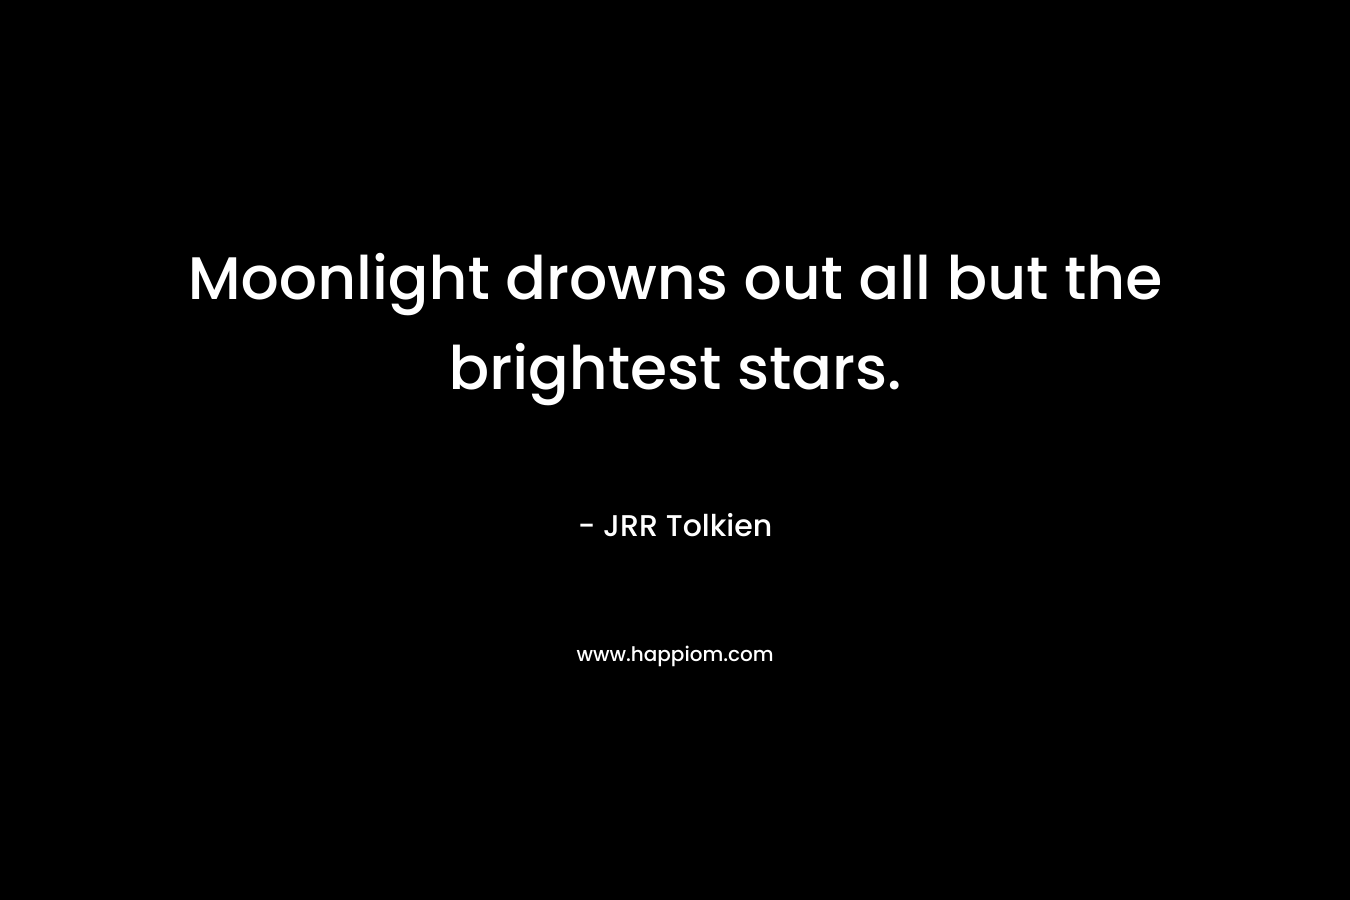 Moonlight drowns out all but the brightest stars. – JRR Tolkien